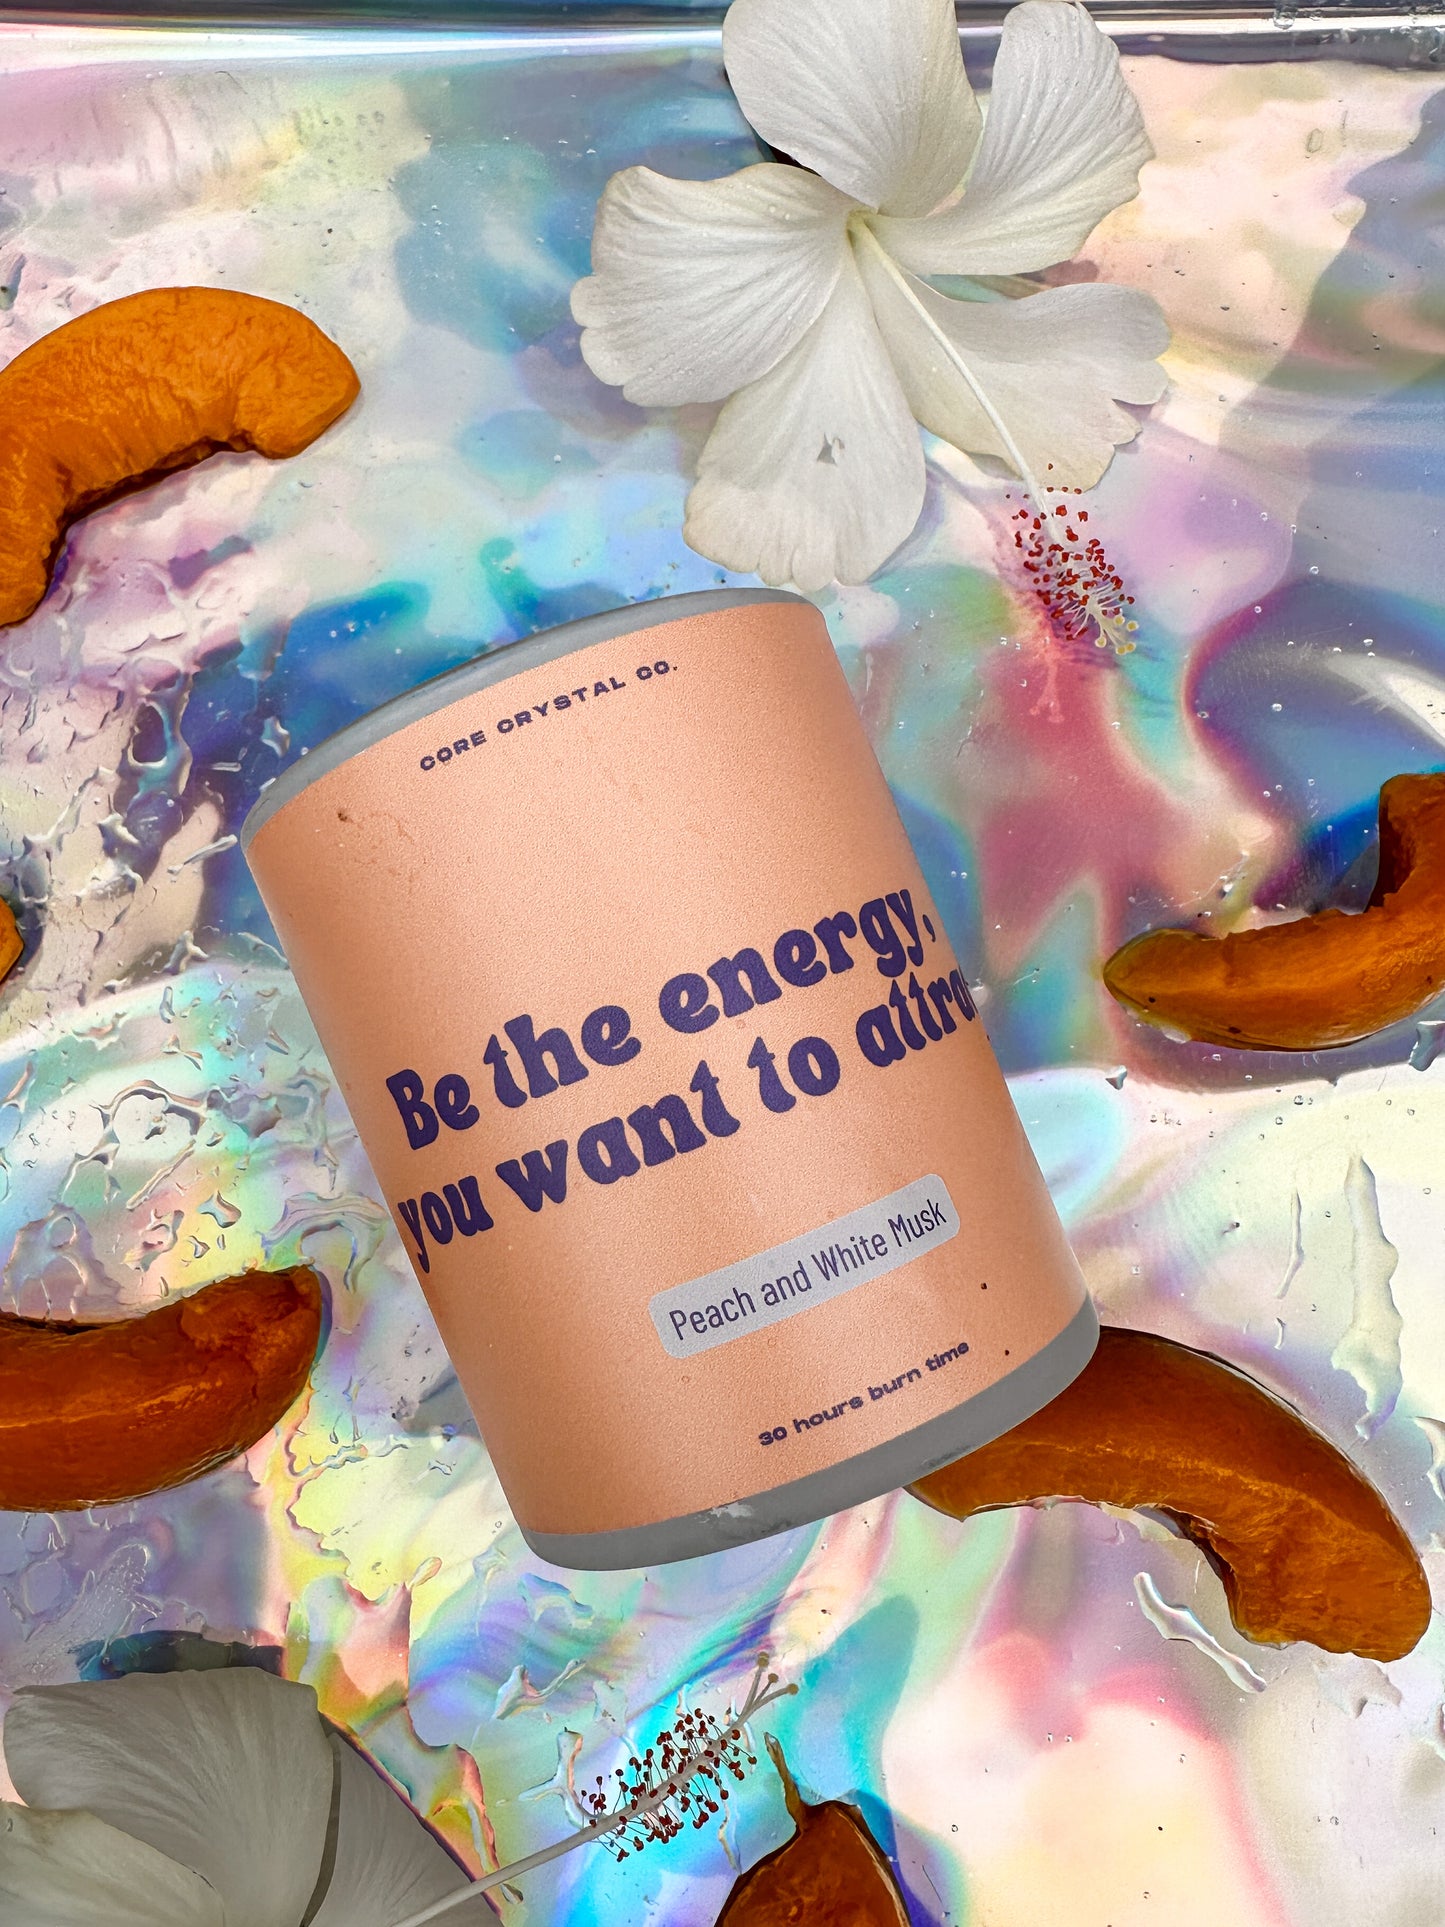 Be the energy you want to attract - Peach and White Musk Candle